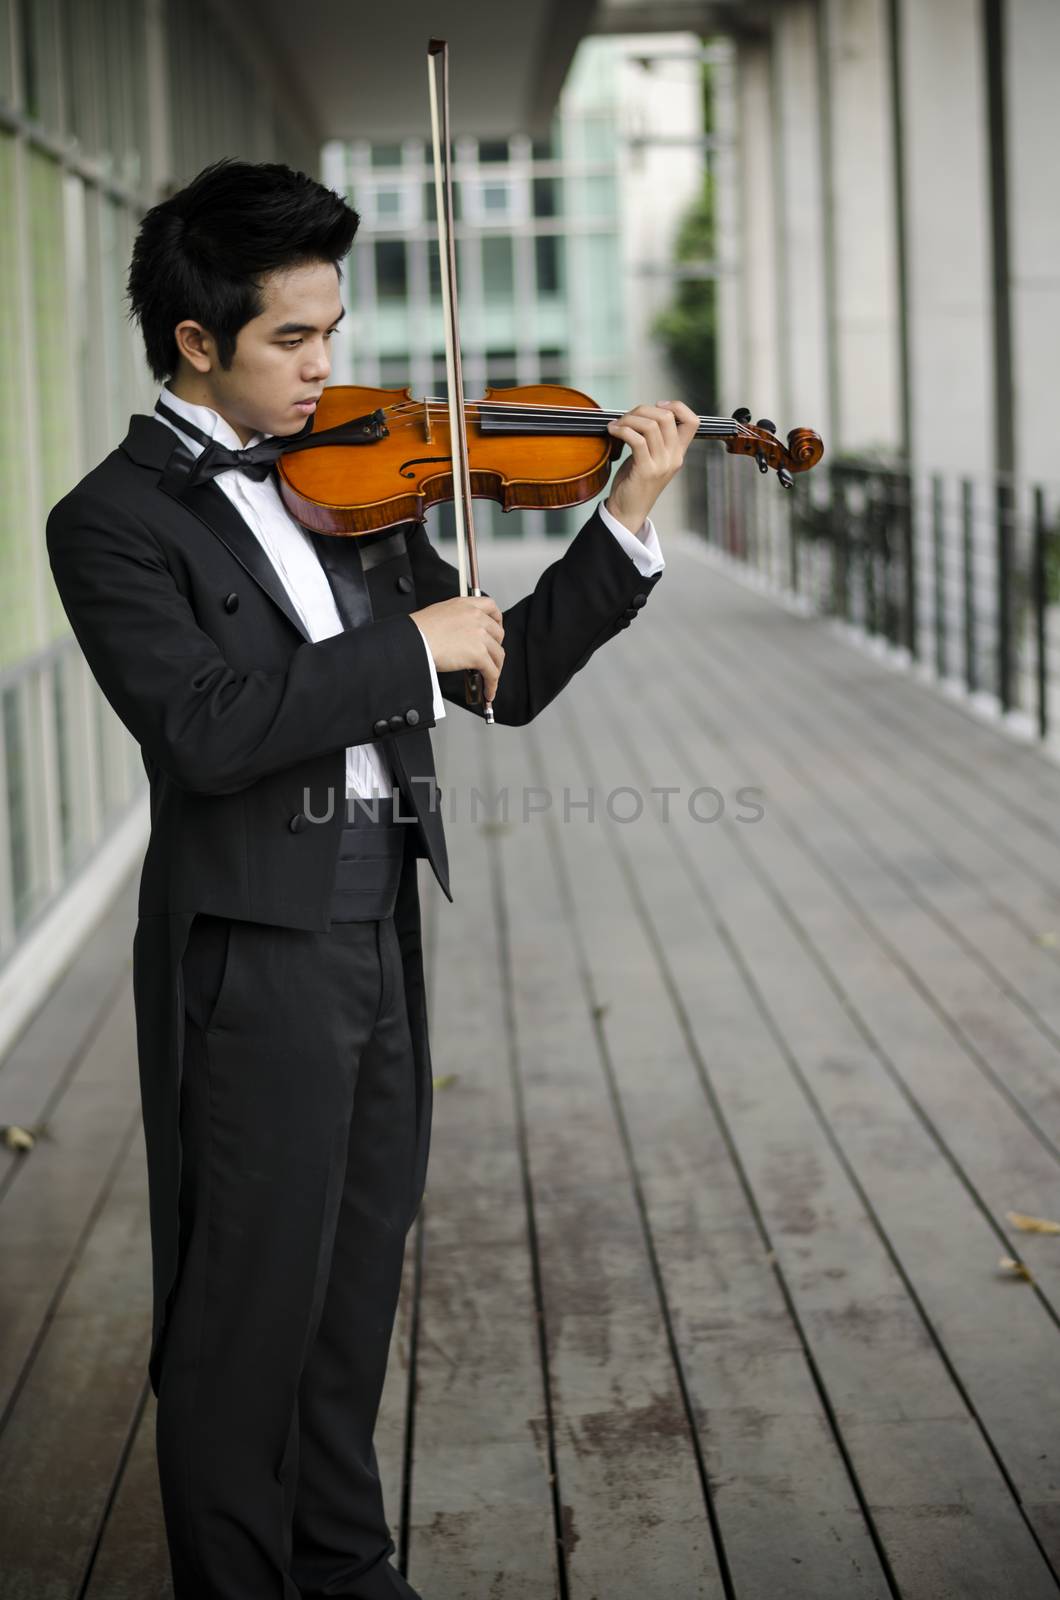 Thailand asia man with his violin he is a soloist